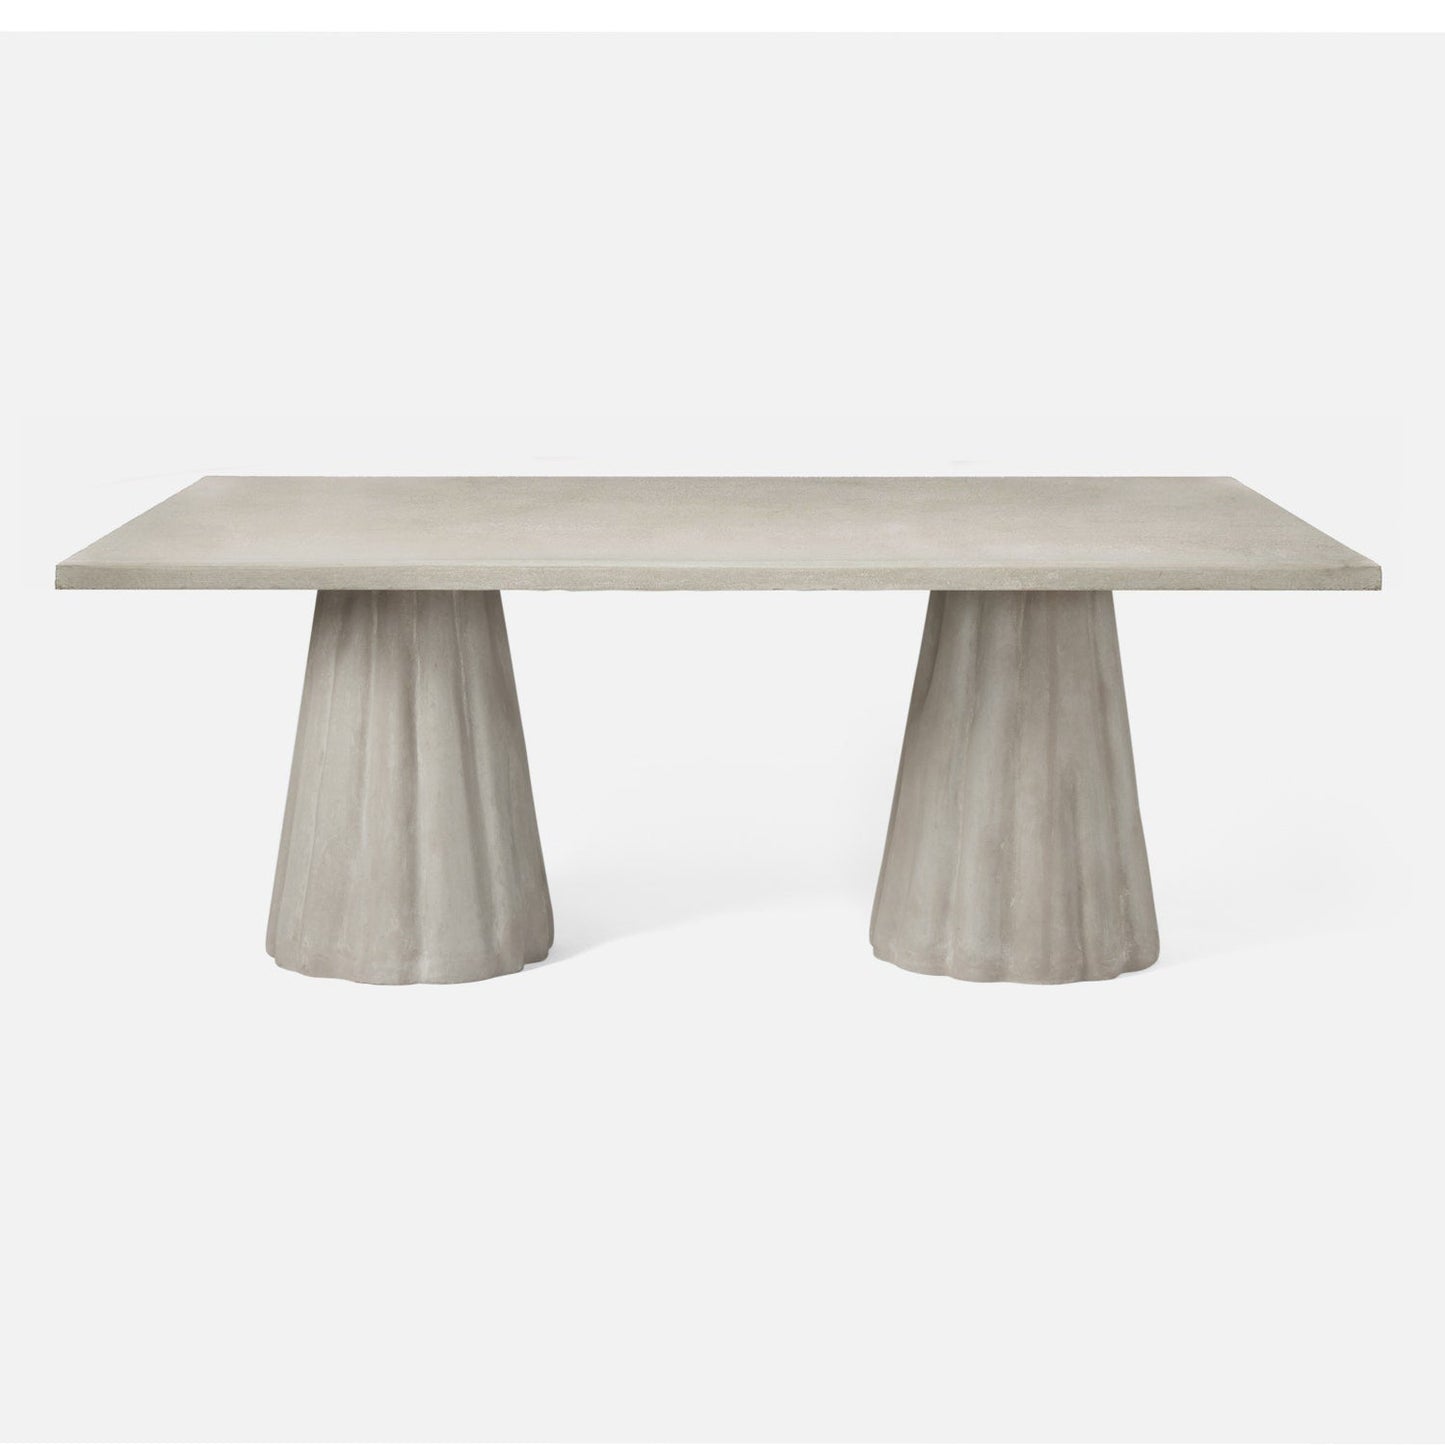 Made Goods Grady 72" x 42" x 30" Light Gray Reconstituted Stone Dinning Table With Rectangle Table Top